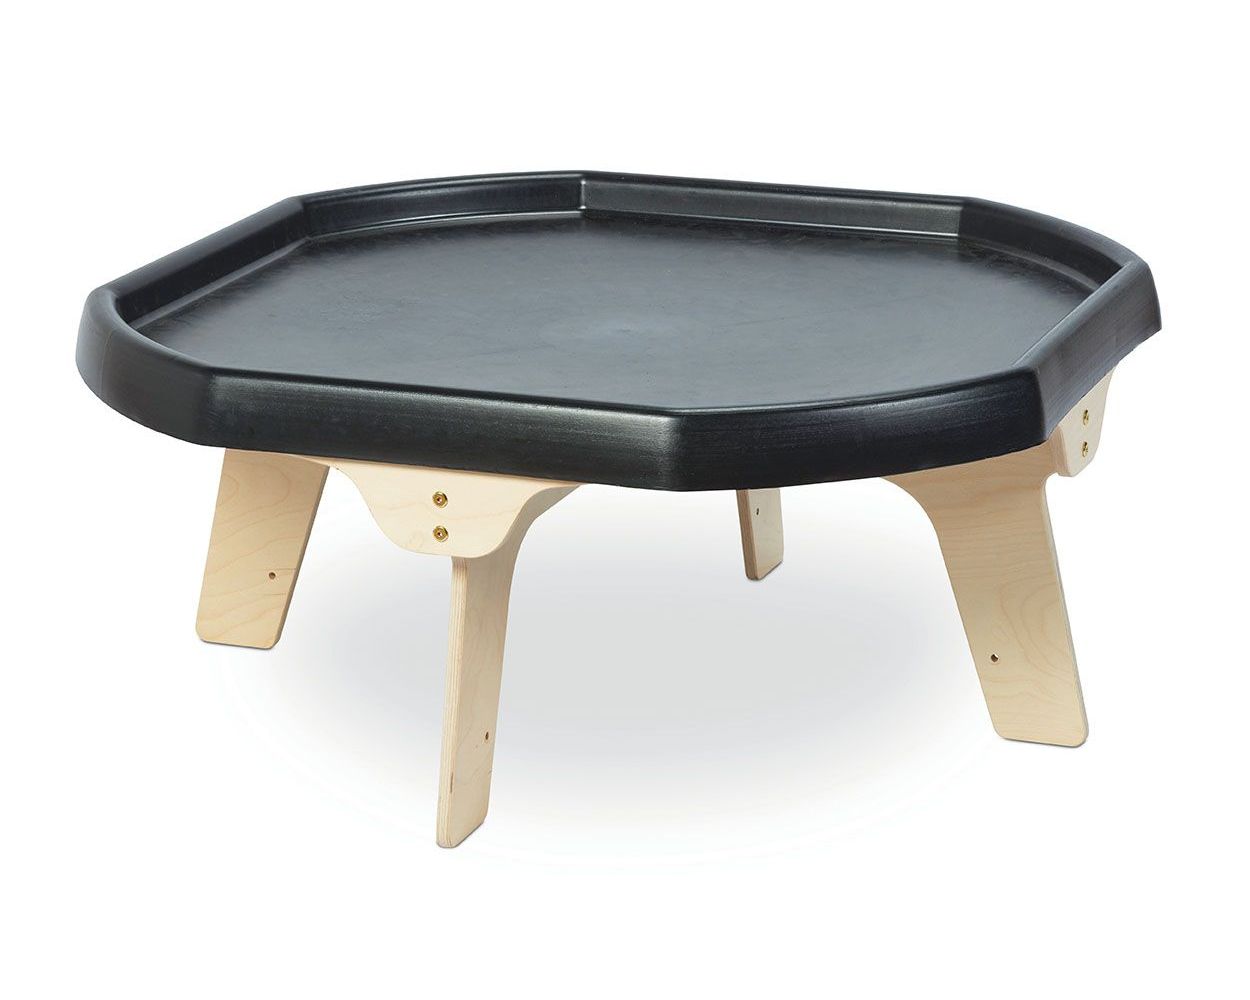 Early Years Play Tray Activity Table, Sand and Water Play